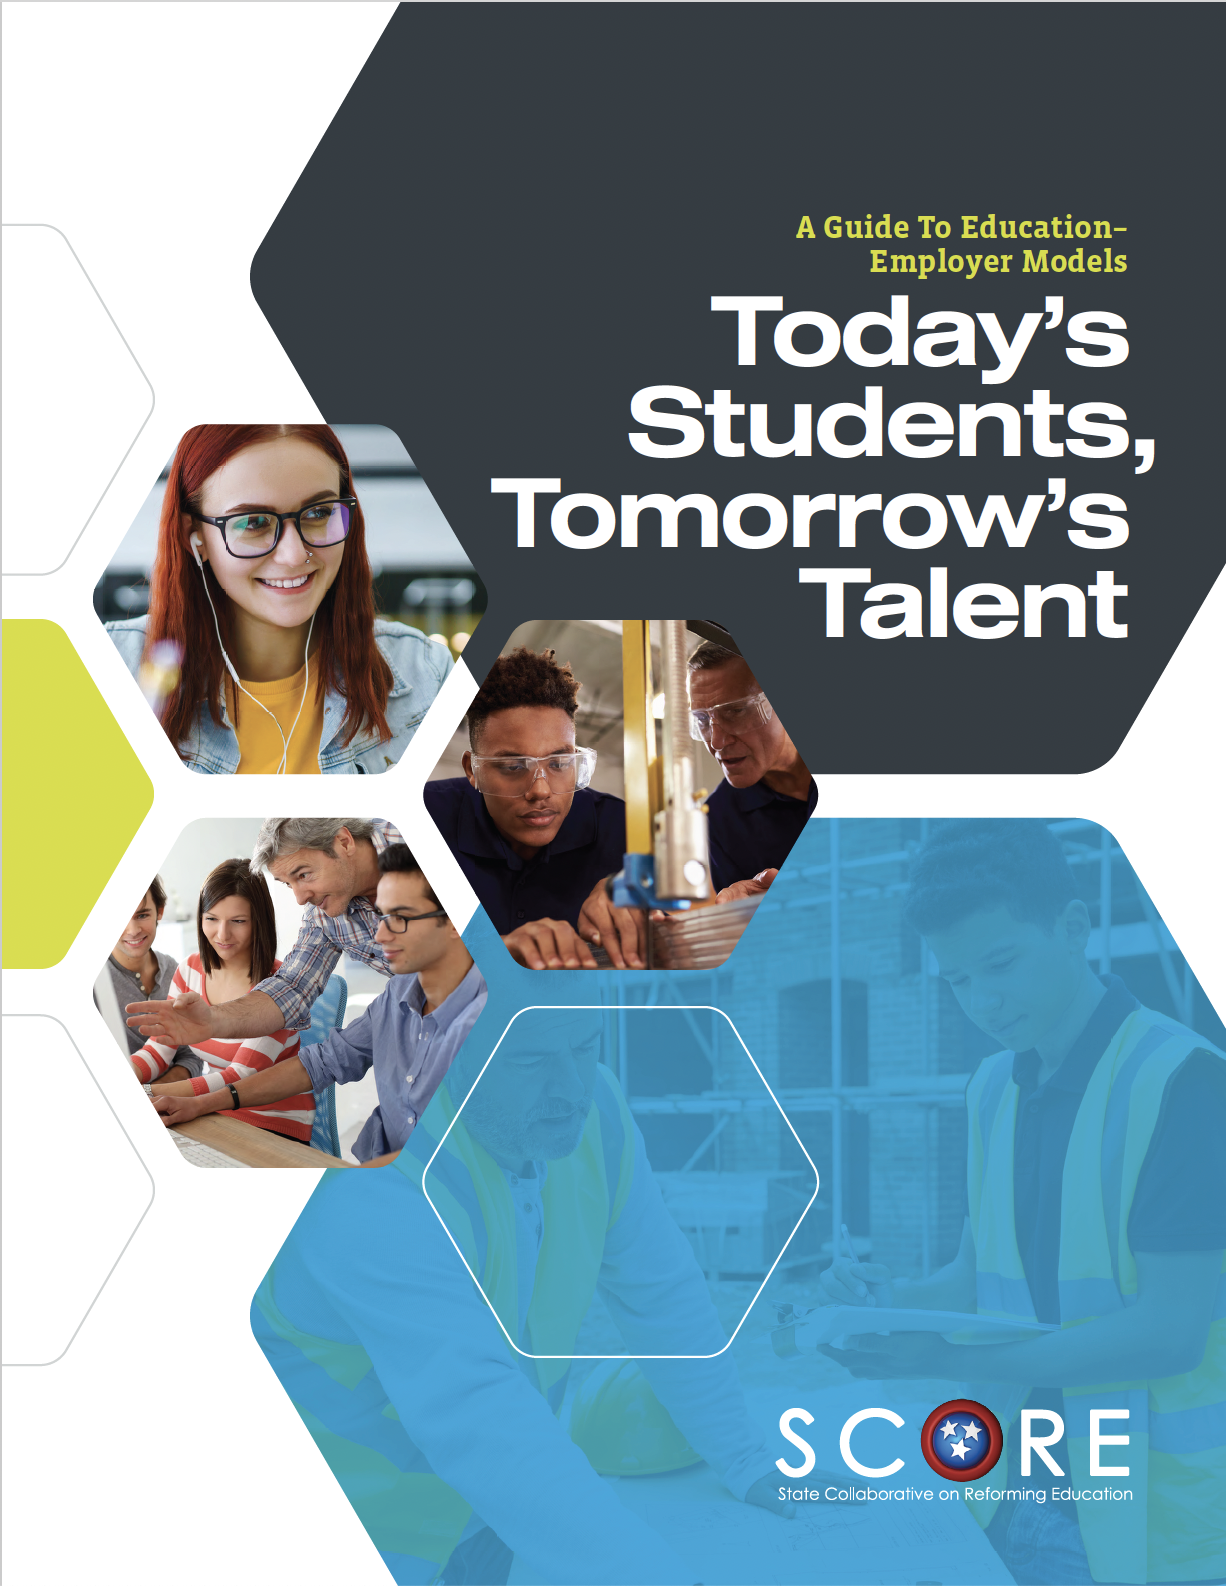 Today’s Students, Tomorrow’s Talent: A Guide To Education-Employer Models